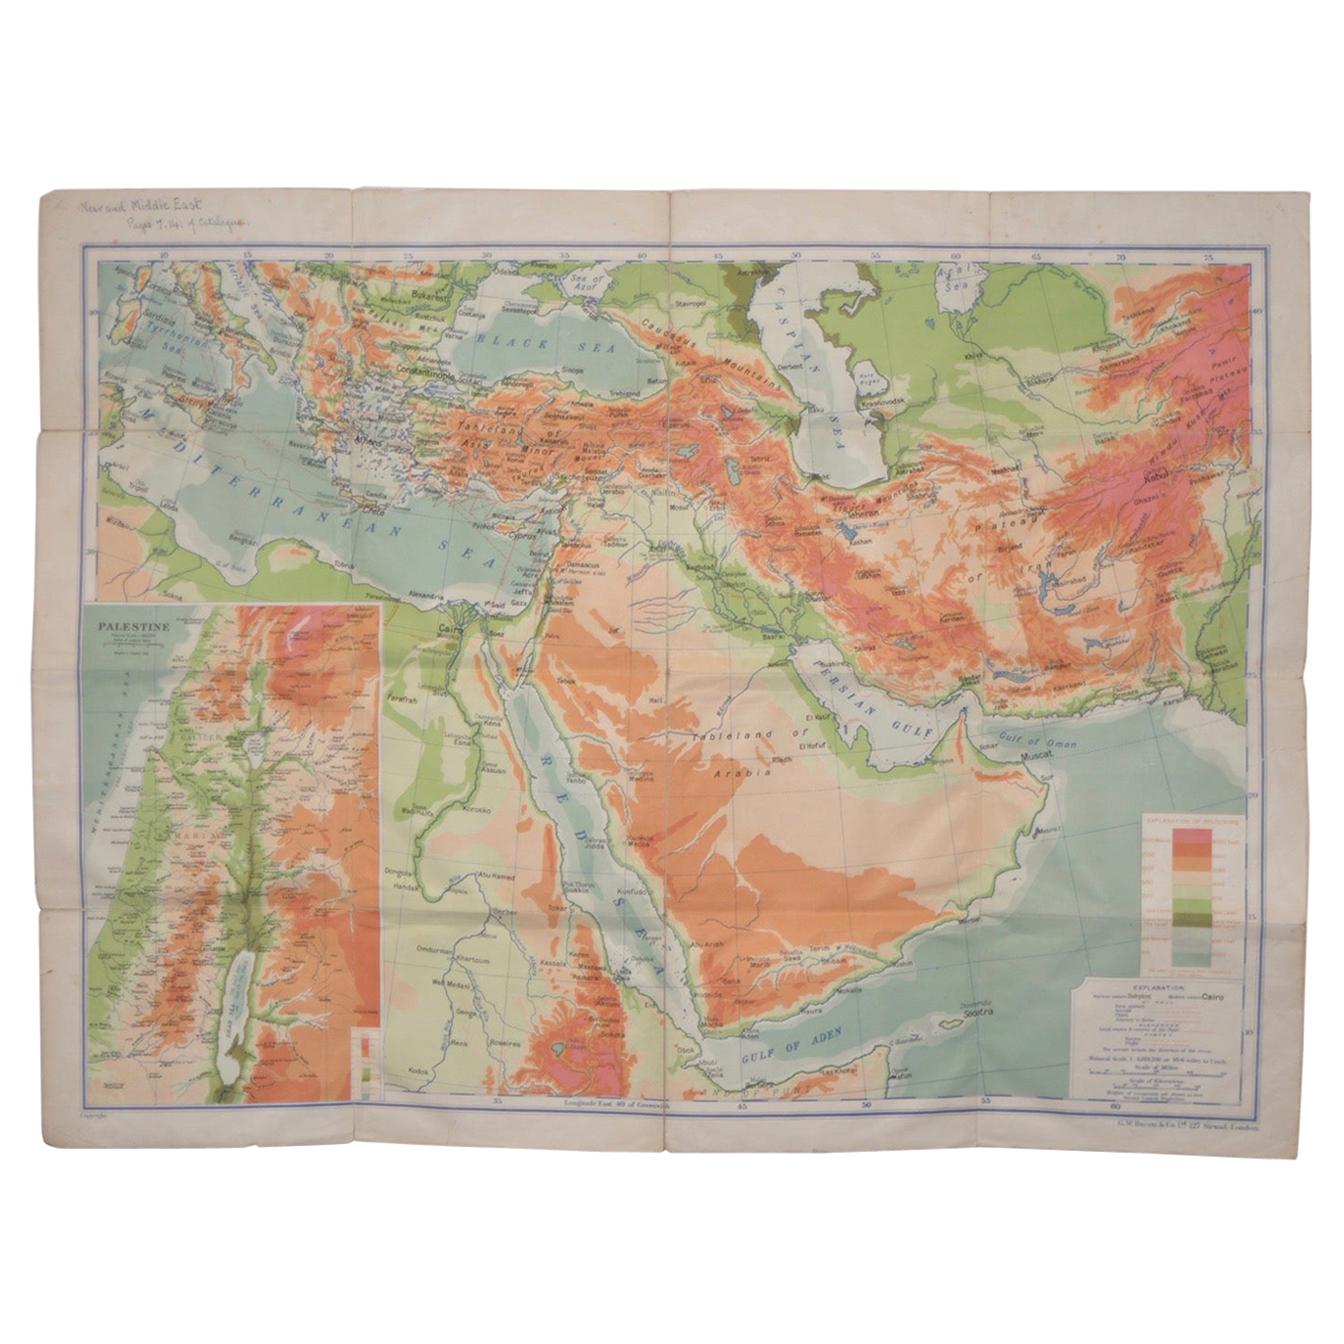 Rare Near & Middle East Map by G.W. Bacon & Co. LTD, London, circa 1880